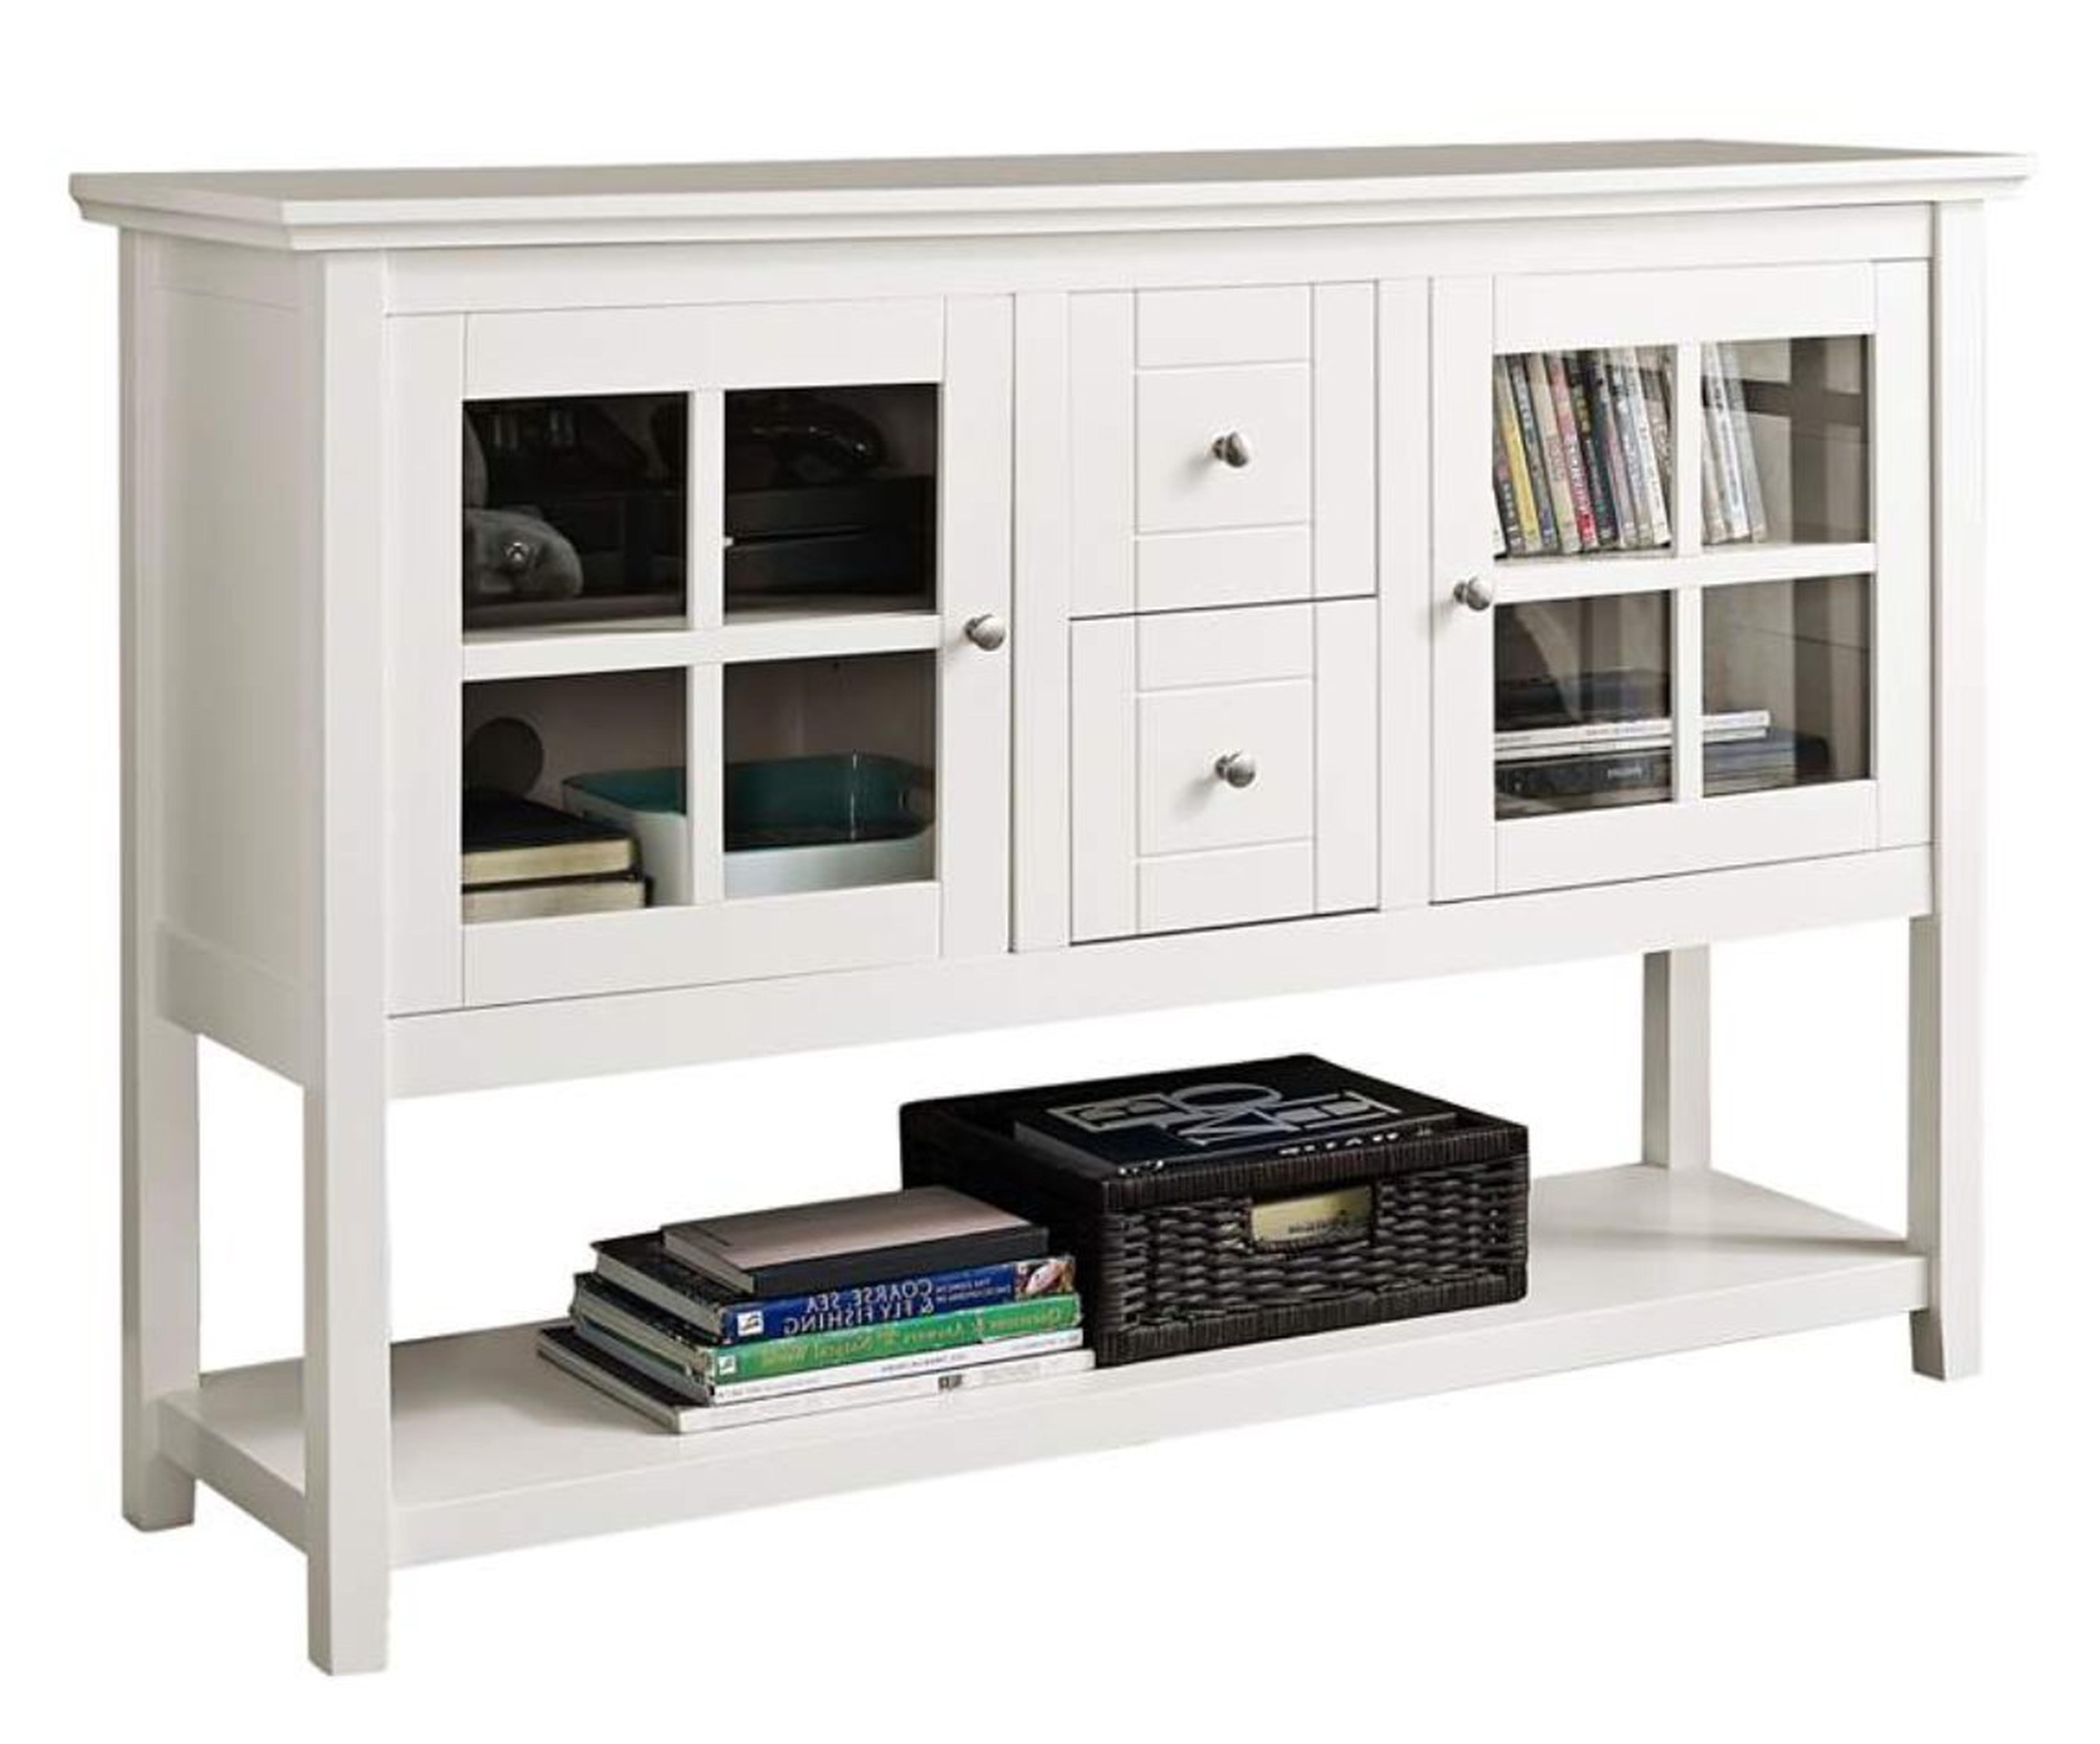 Robson 52" Wide White Wood 2-Drawer TV Stand Buffet - Style # 90M96 - Lamps Plus